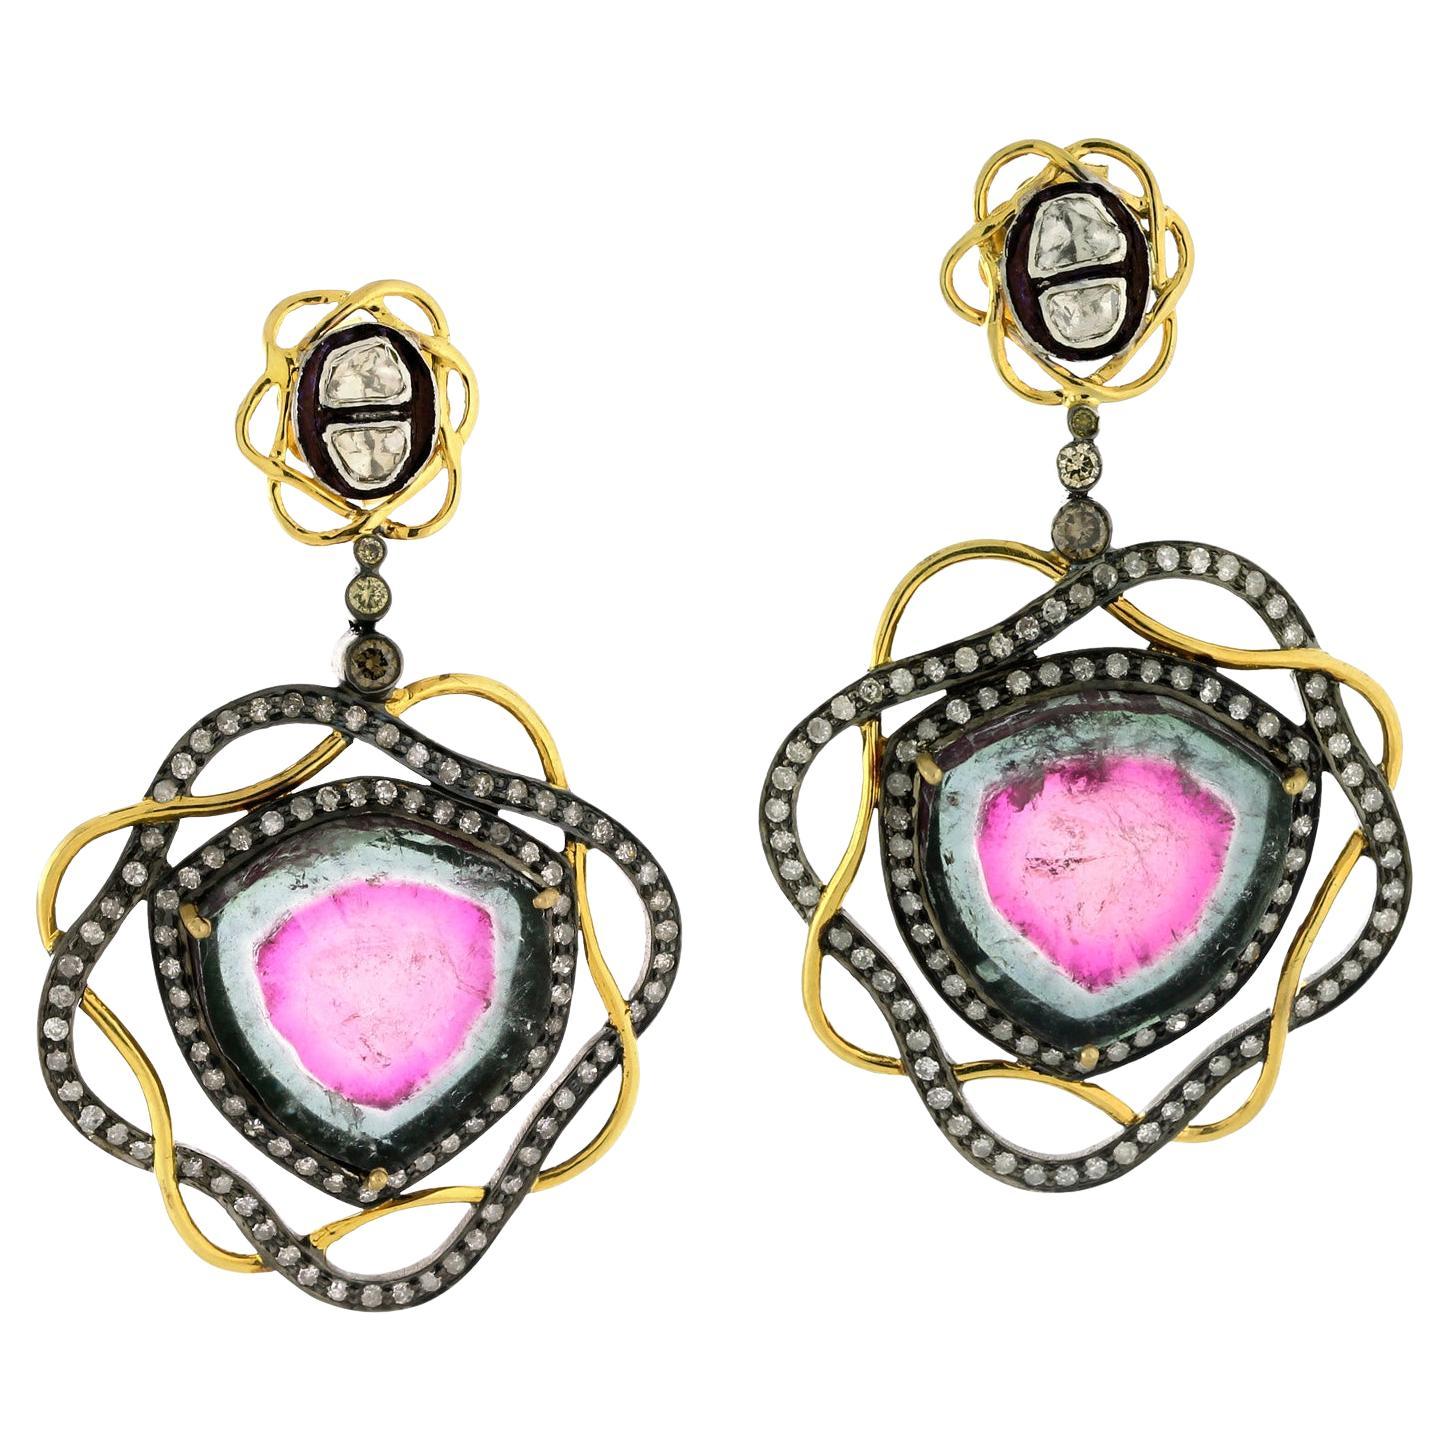 Pink Tourmaline earring Enclosed In Pave Diamonds Set Made In 18k Gold & Silver For Sale